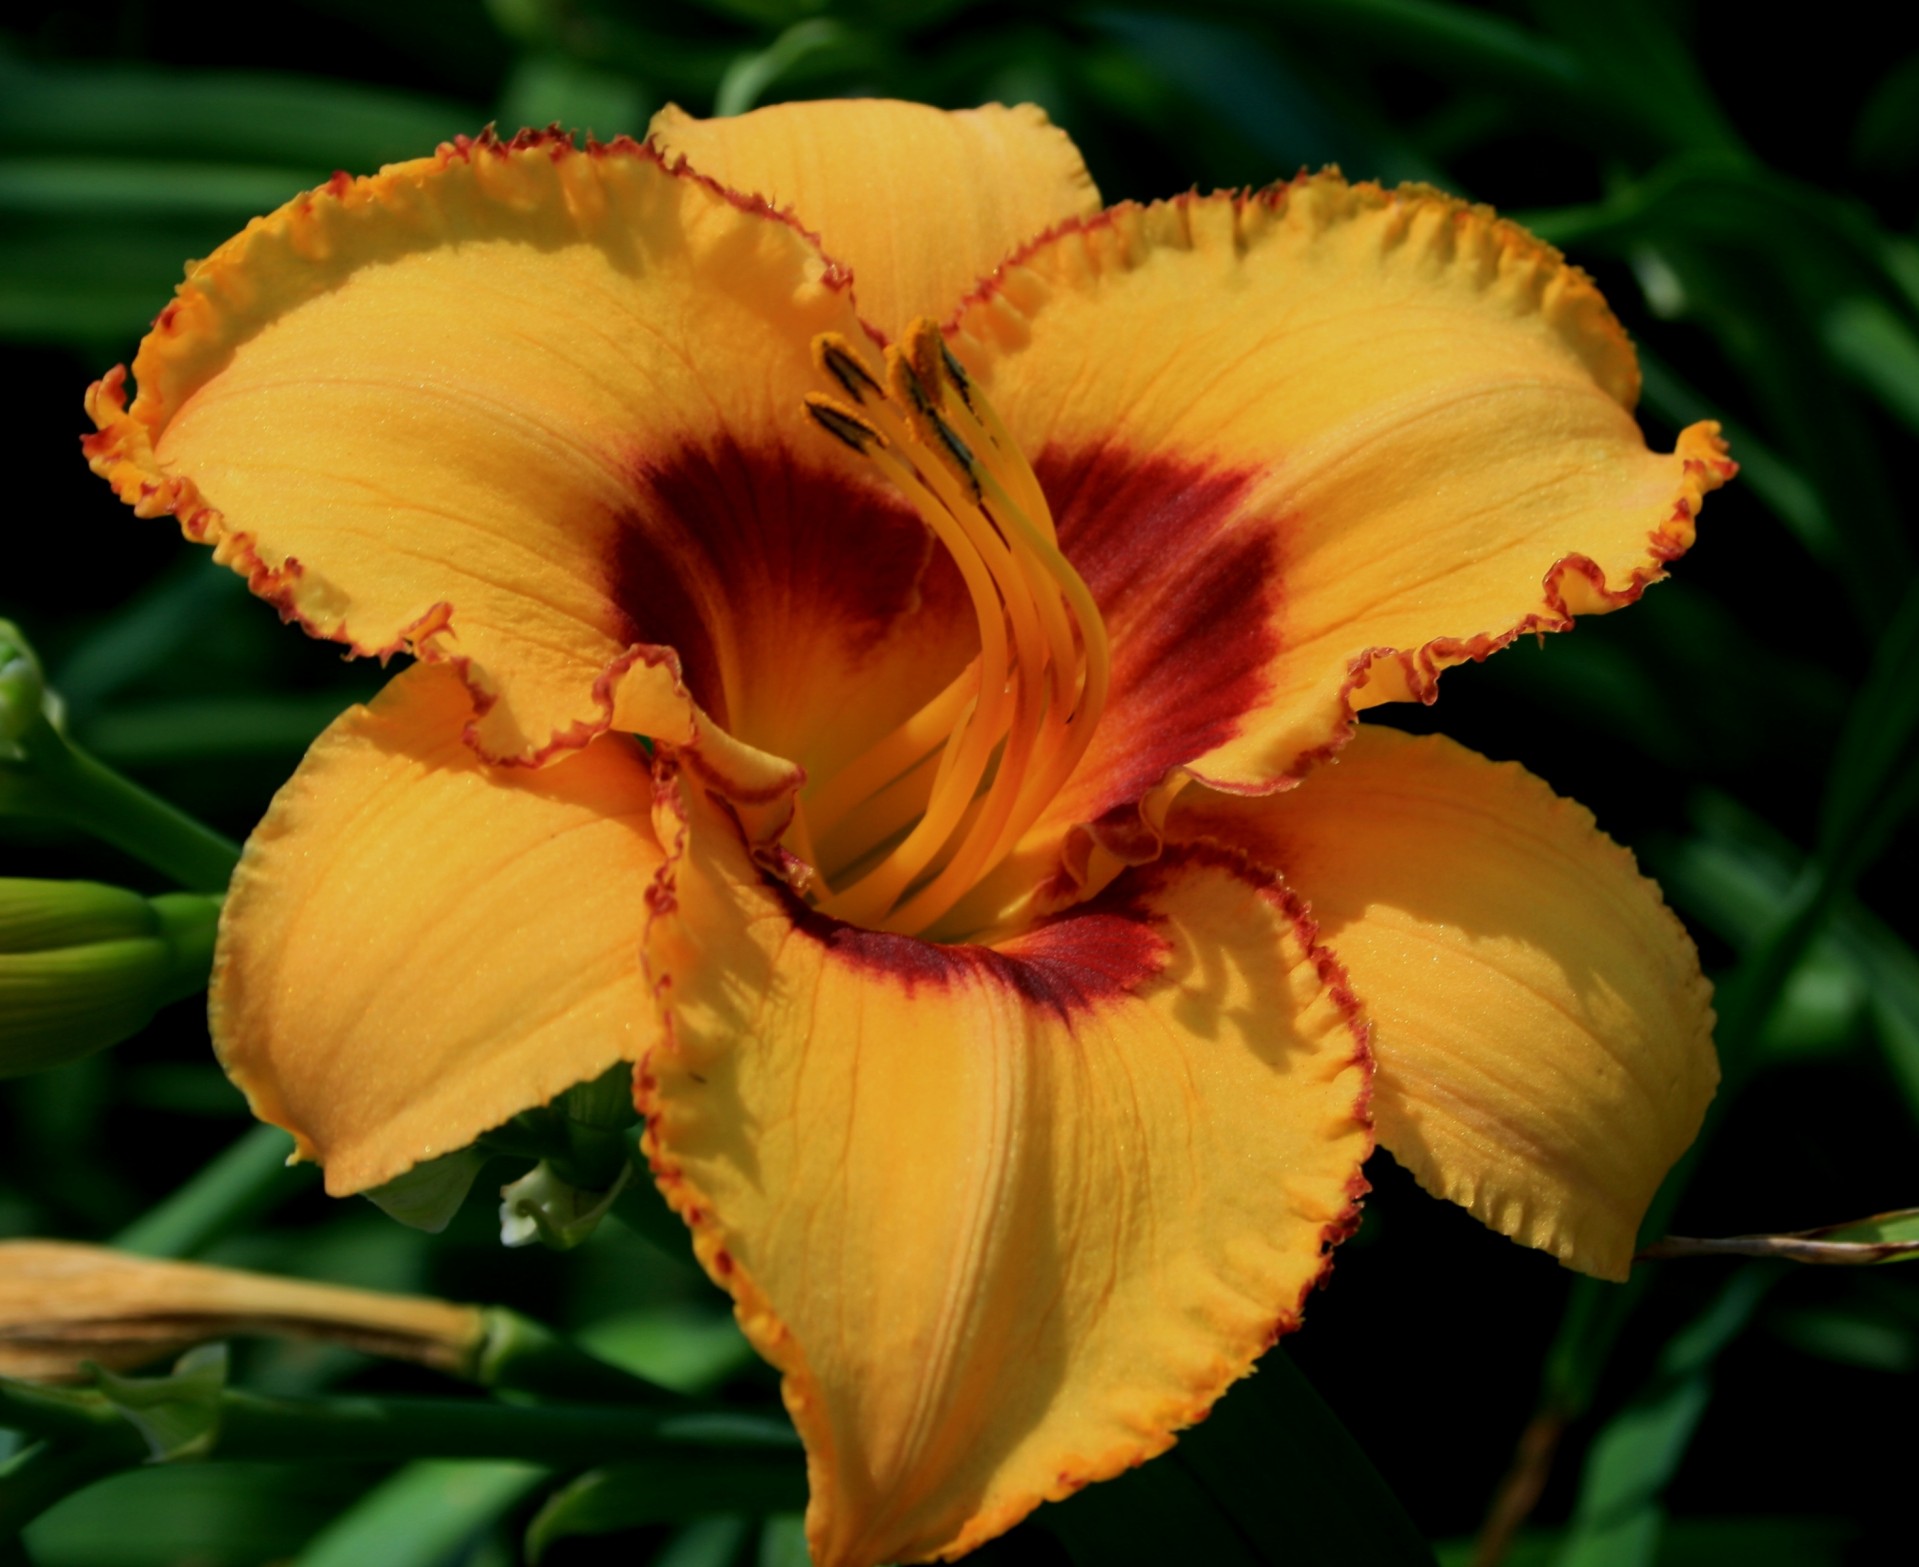 Yellow Day Lily